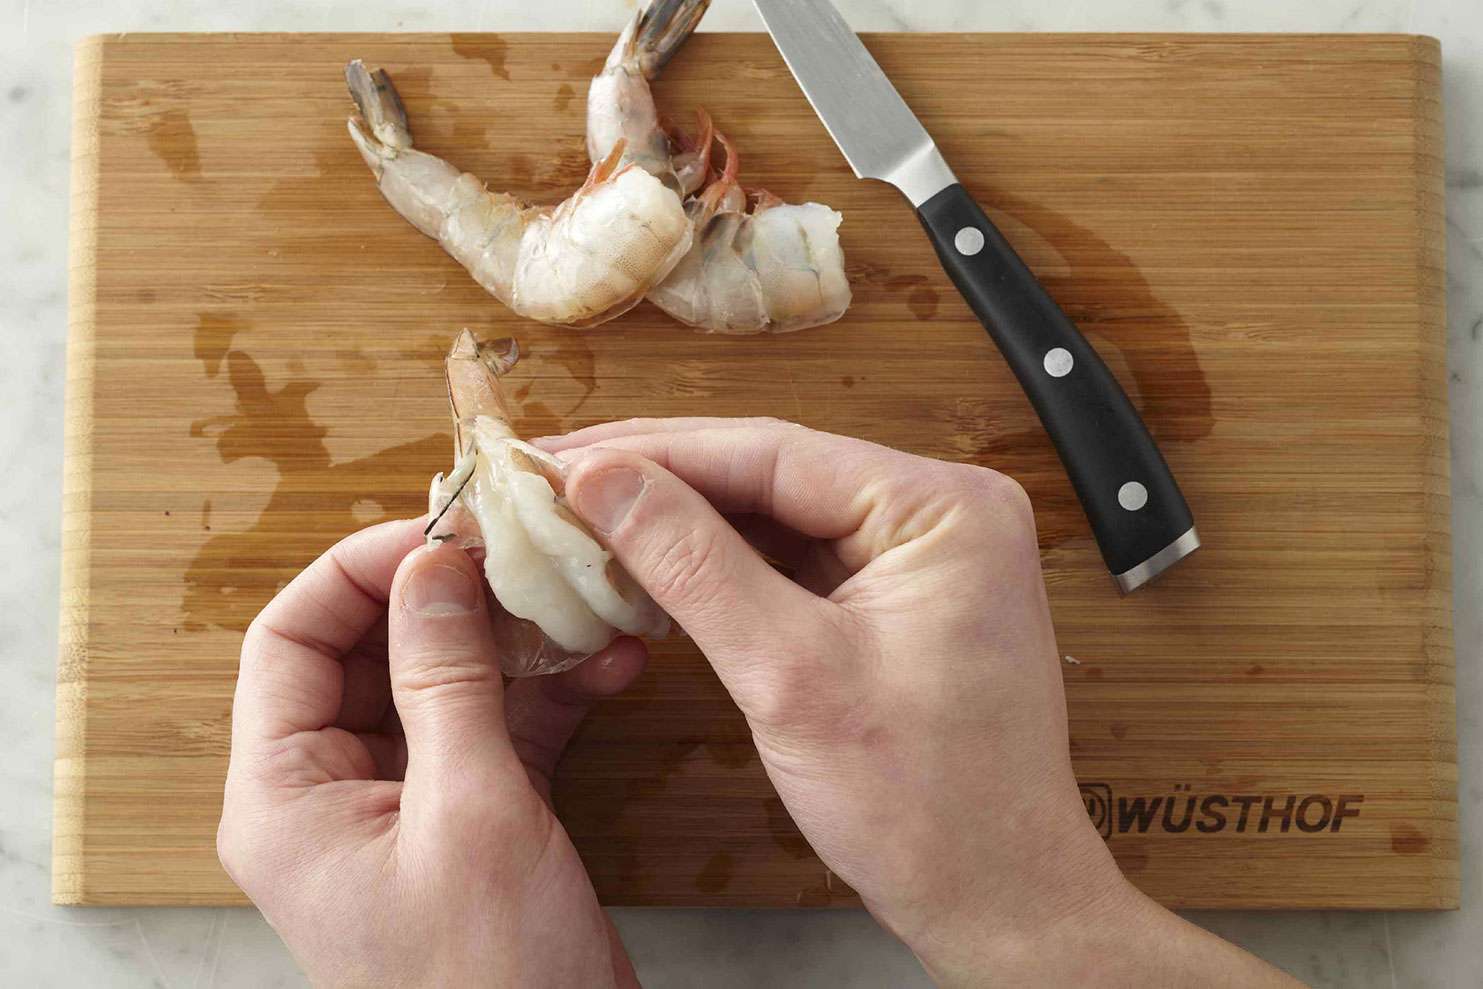 Person's hands peeling and deveing shrimp over cutting board